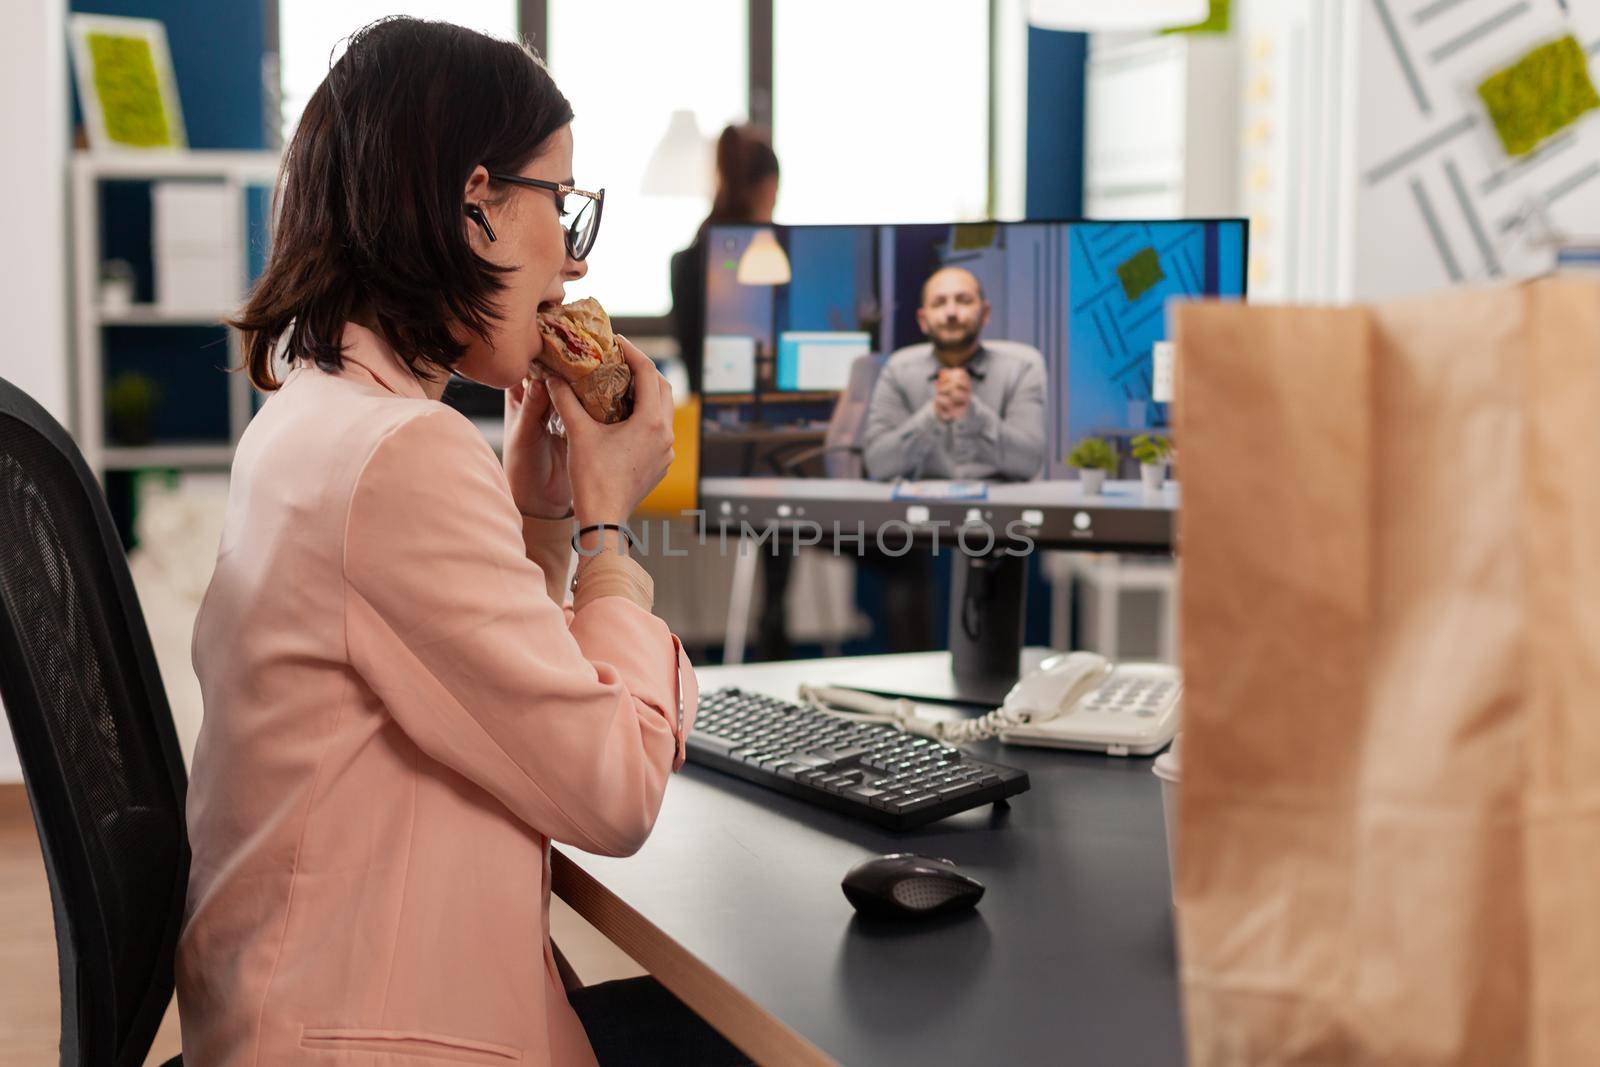 Businesswoman eating delivery takeaway sandwich during online videocall conference meeting discussing with remote coworker. Manager sitting at desk having takeout lunchtime in office